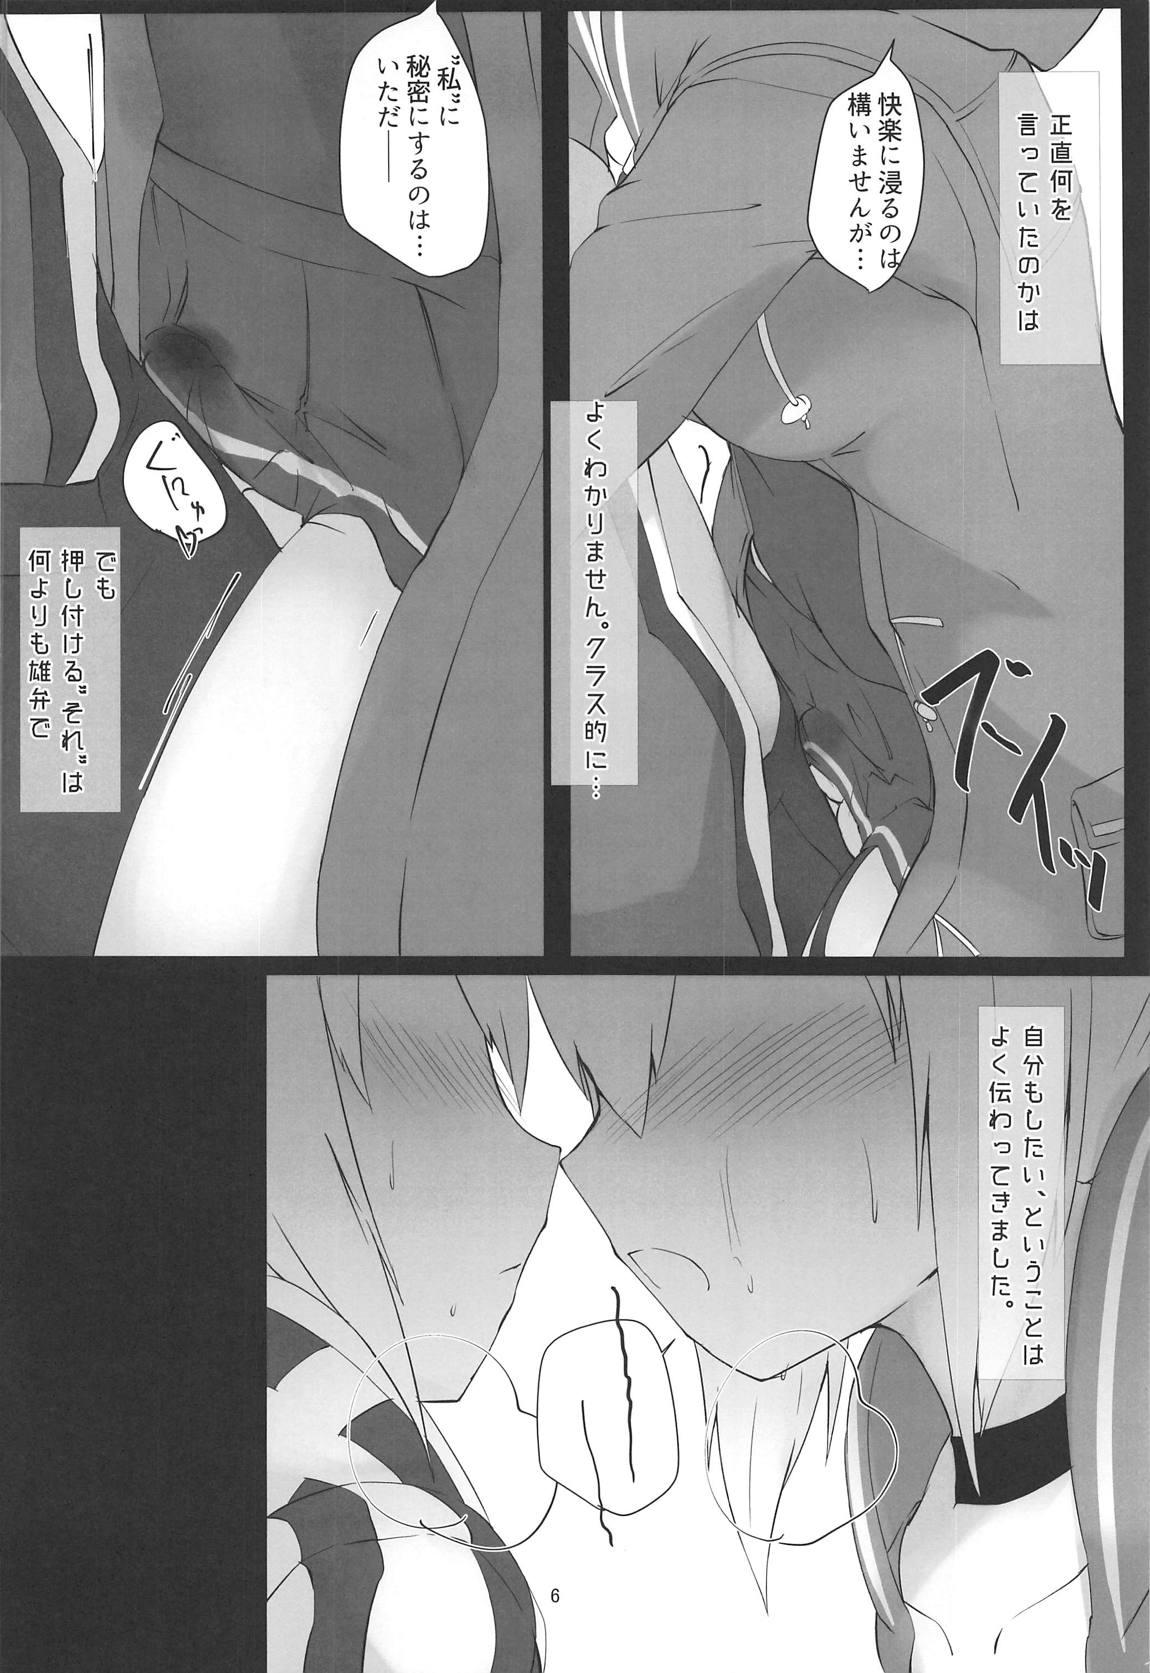 Punished eXXpose herself+ - Fate grand order Bigbooty - Page 5